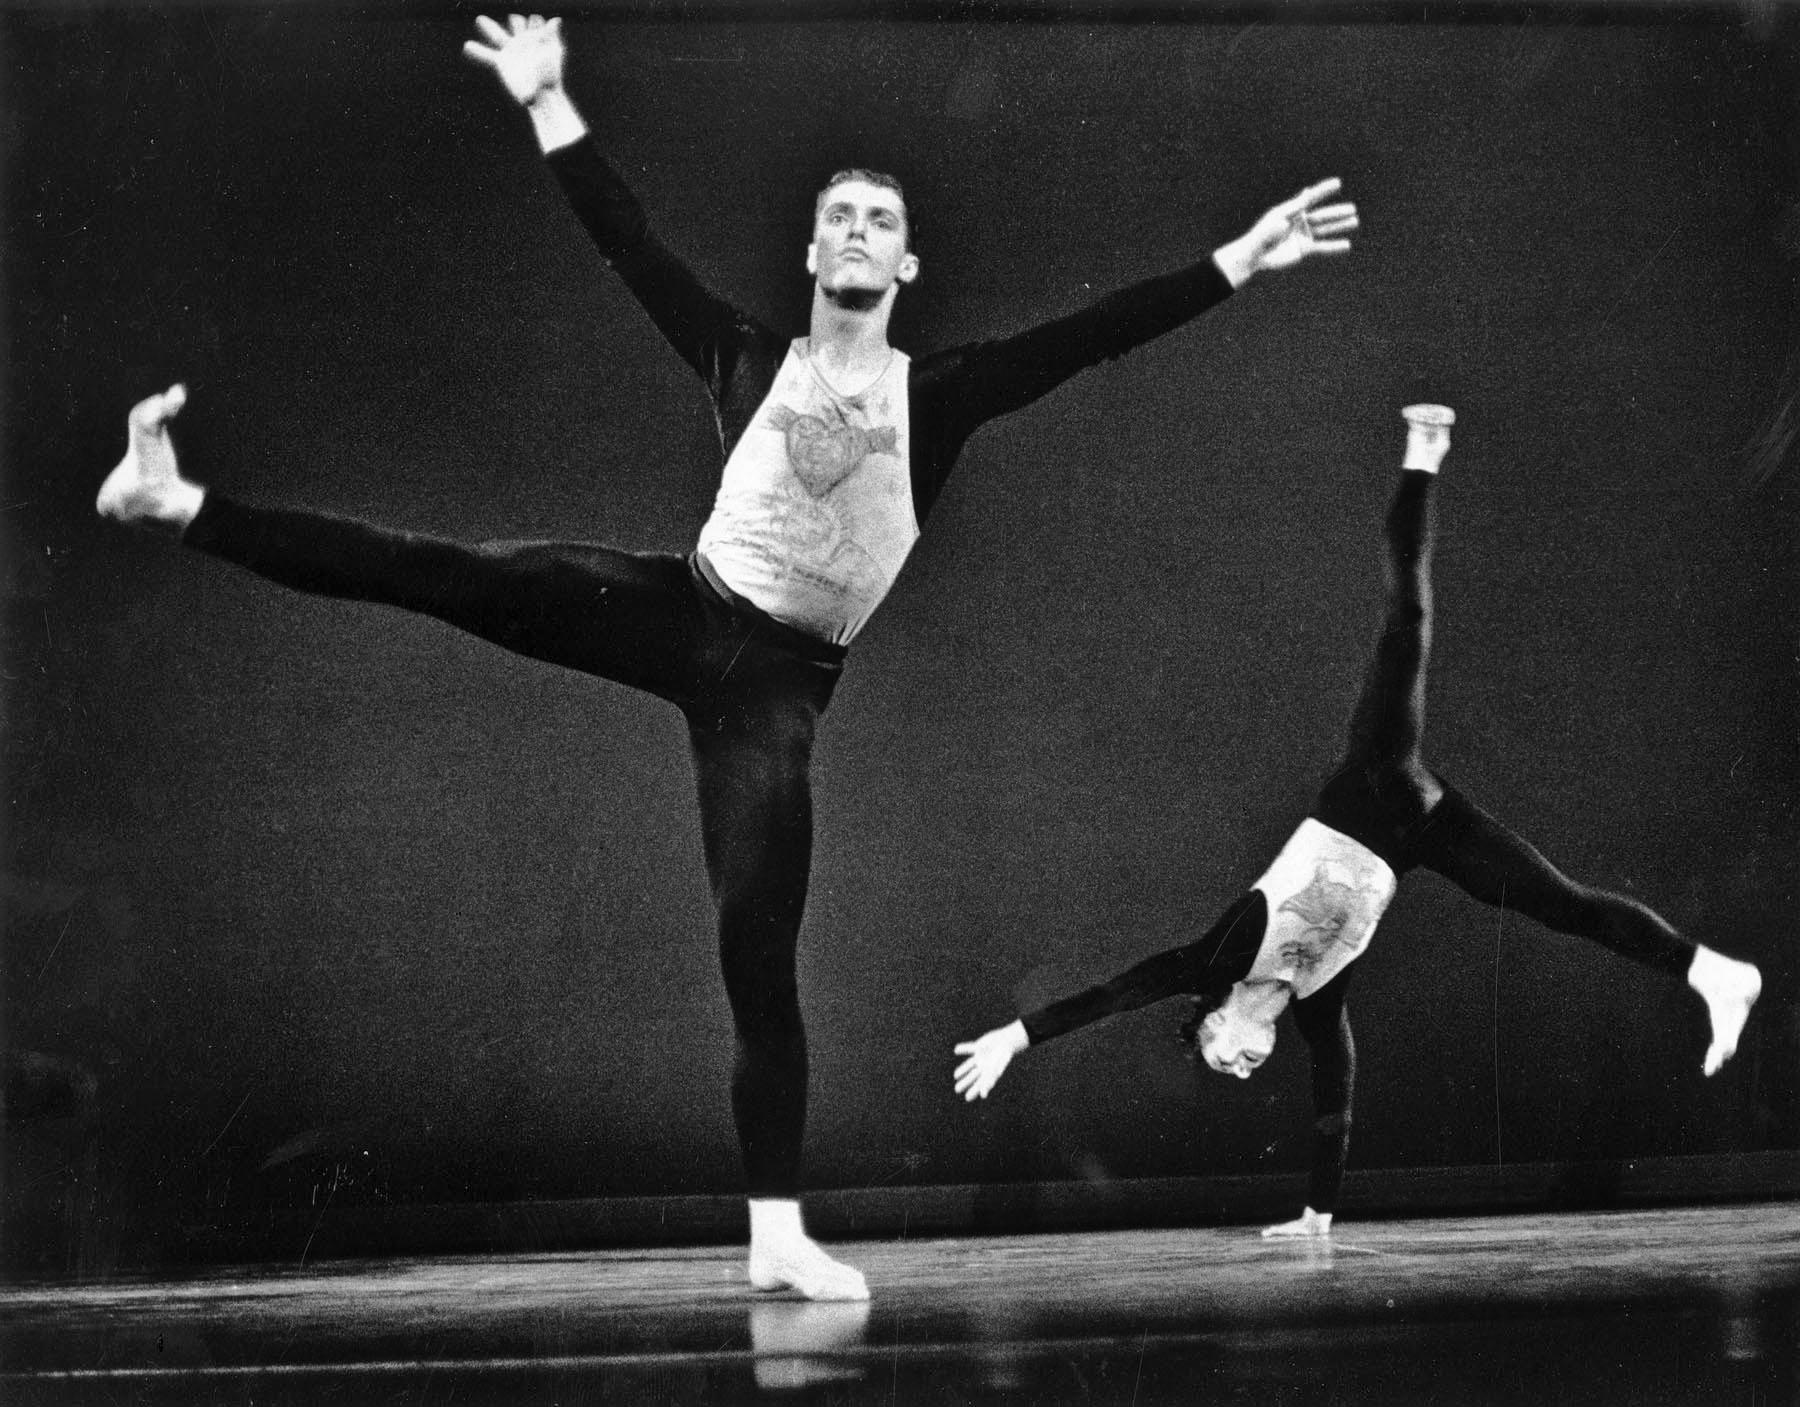 Jack Mitchell Black and White Photograph - Merce Cunningham and Steve Paxton performing 'Antic Meet'